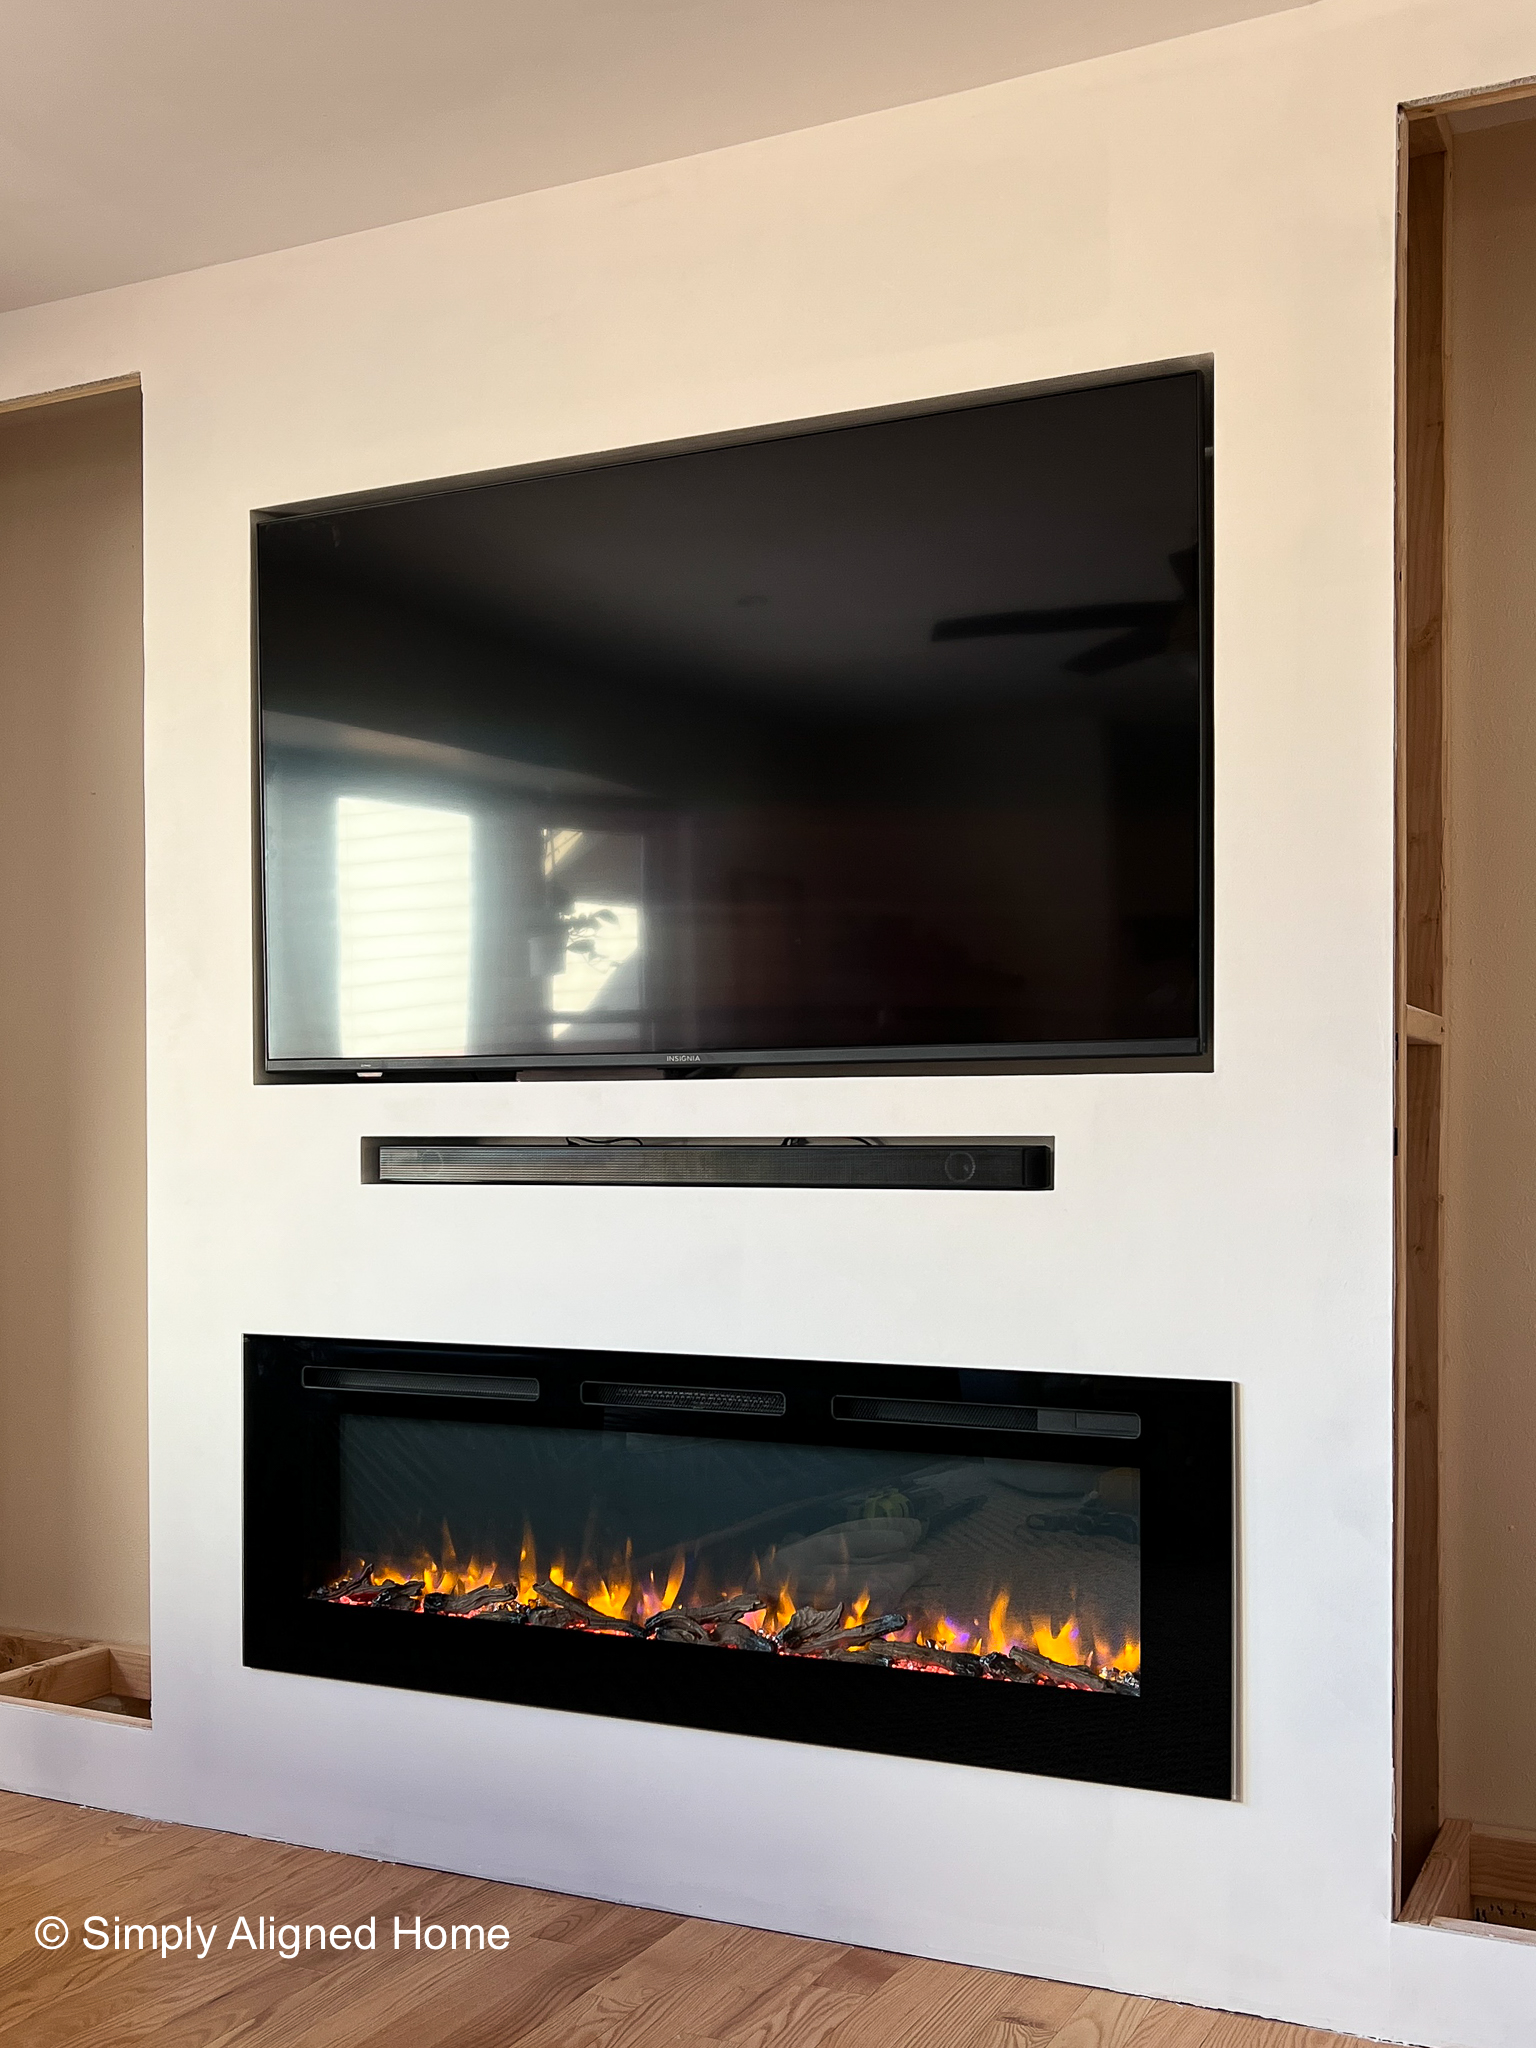 DIY ELECTRIC FIREPLACE BUILT-IN: How to Frame and Install the